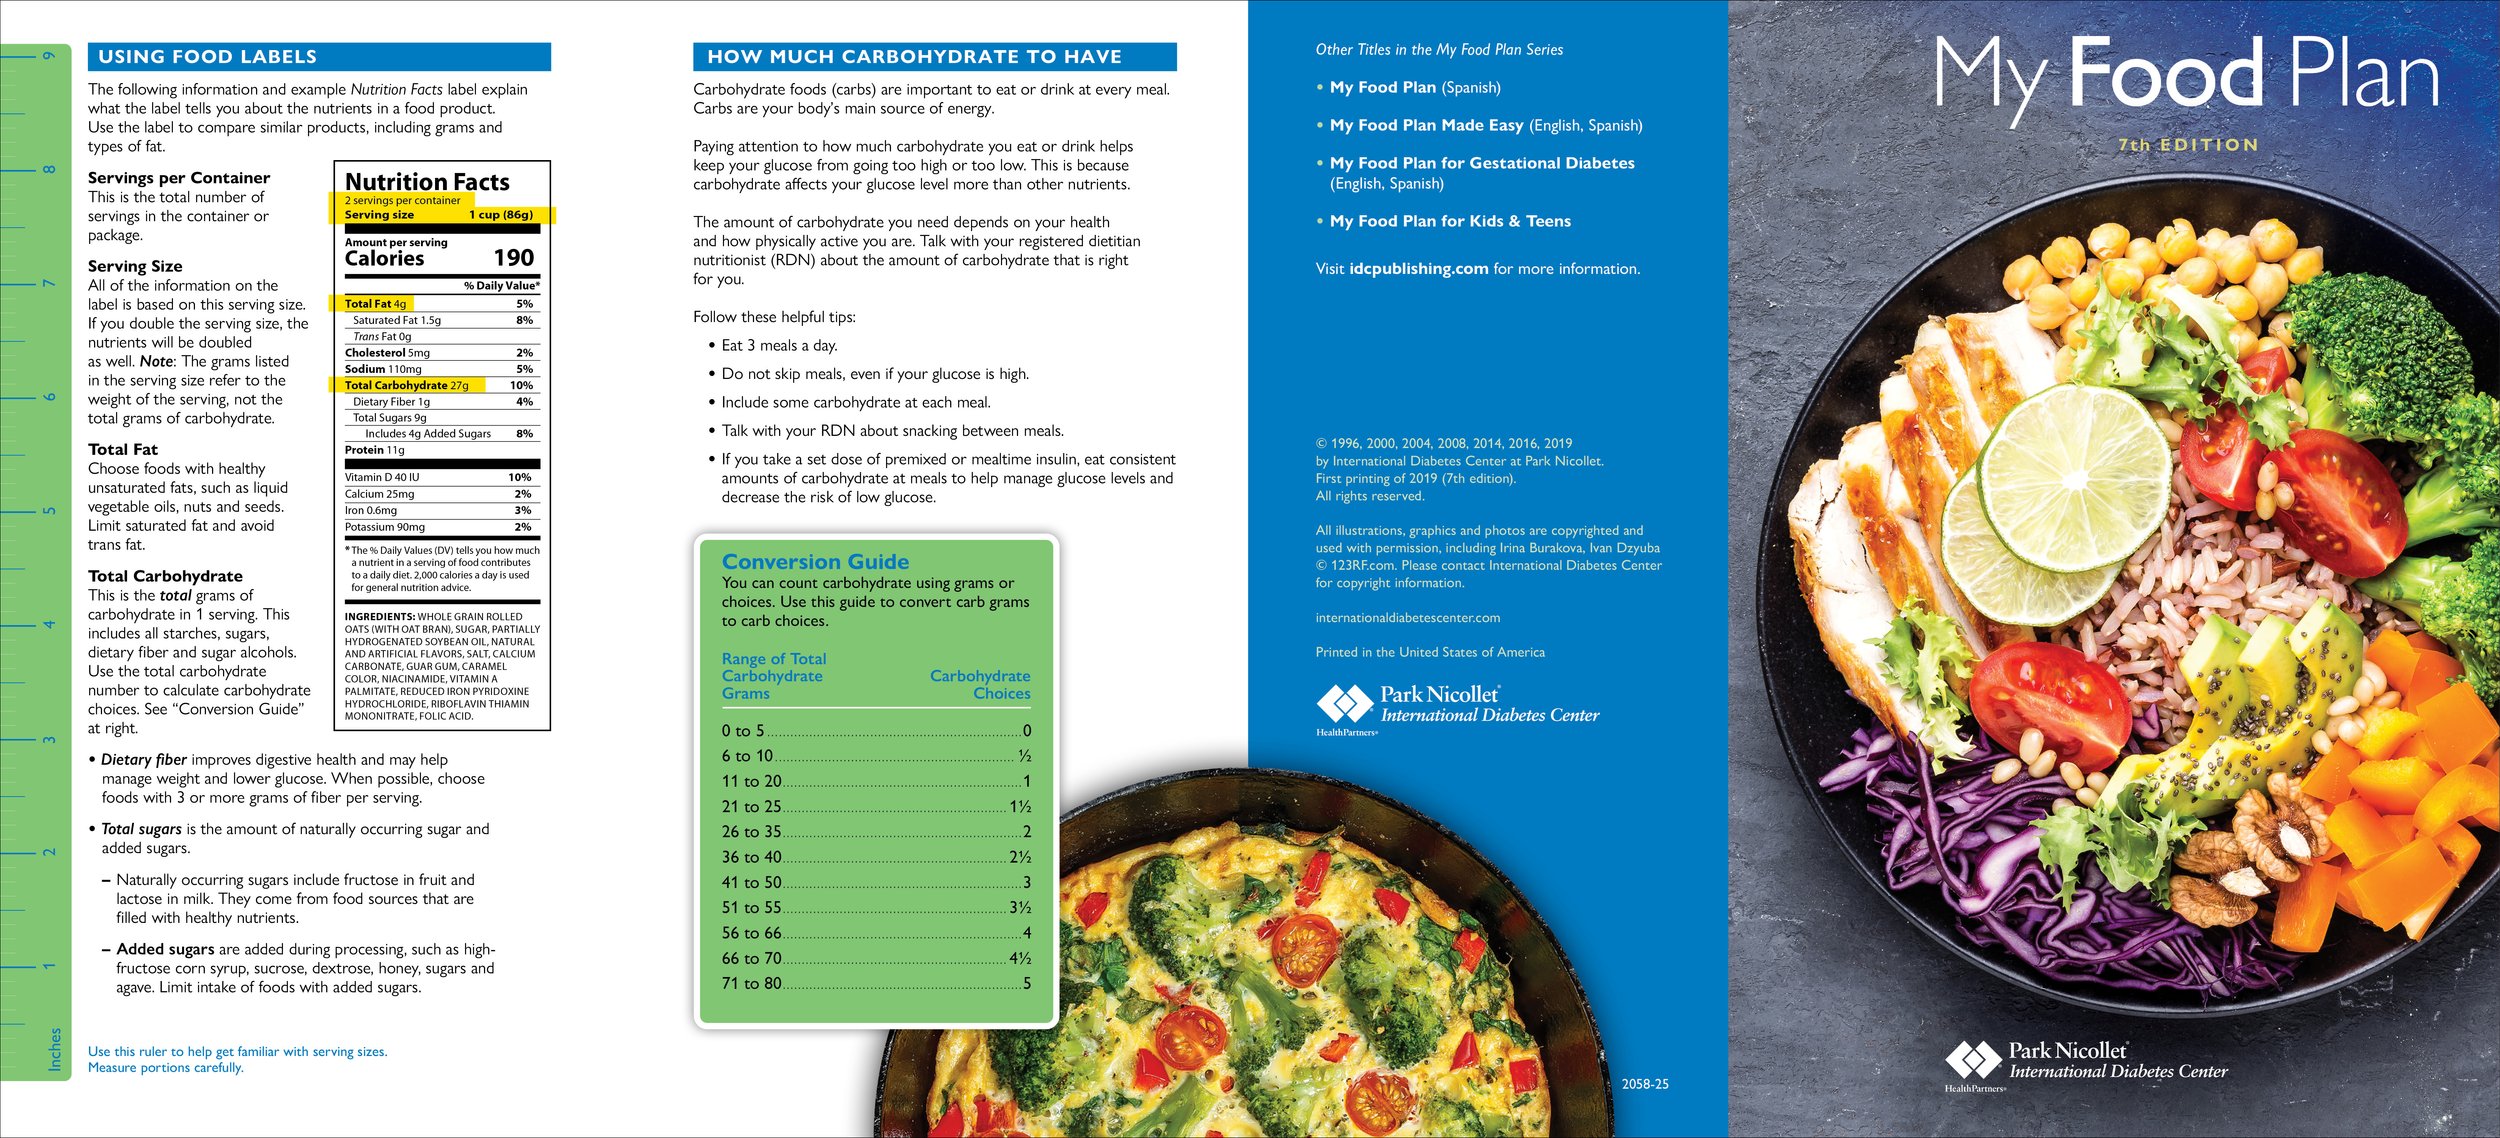   My Food Plan  brochure developed by the International Diabetes Center and HealthPartners 